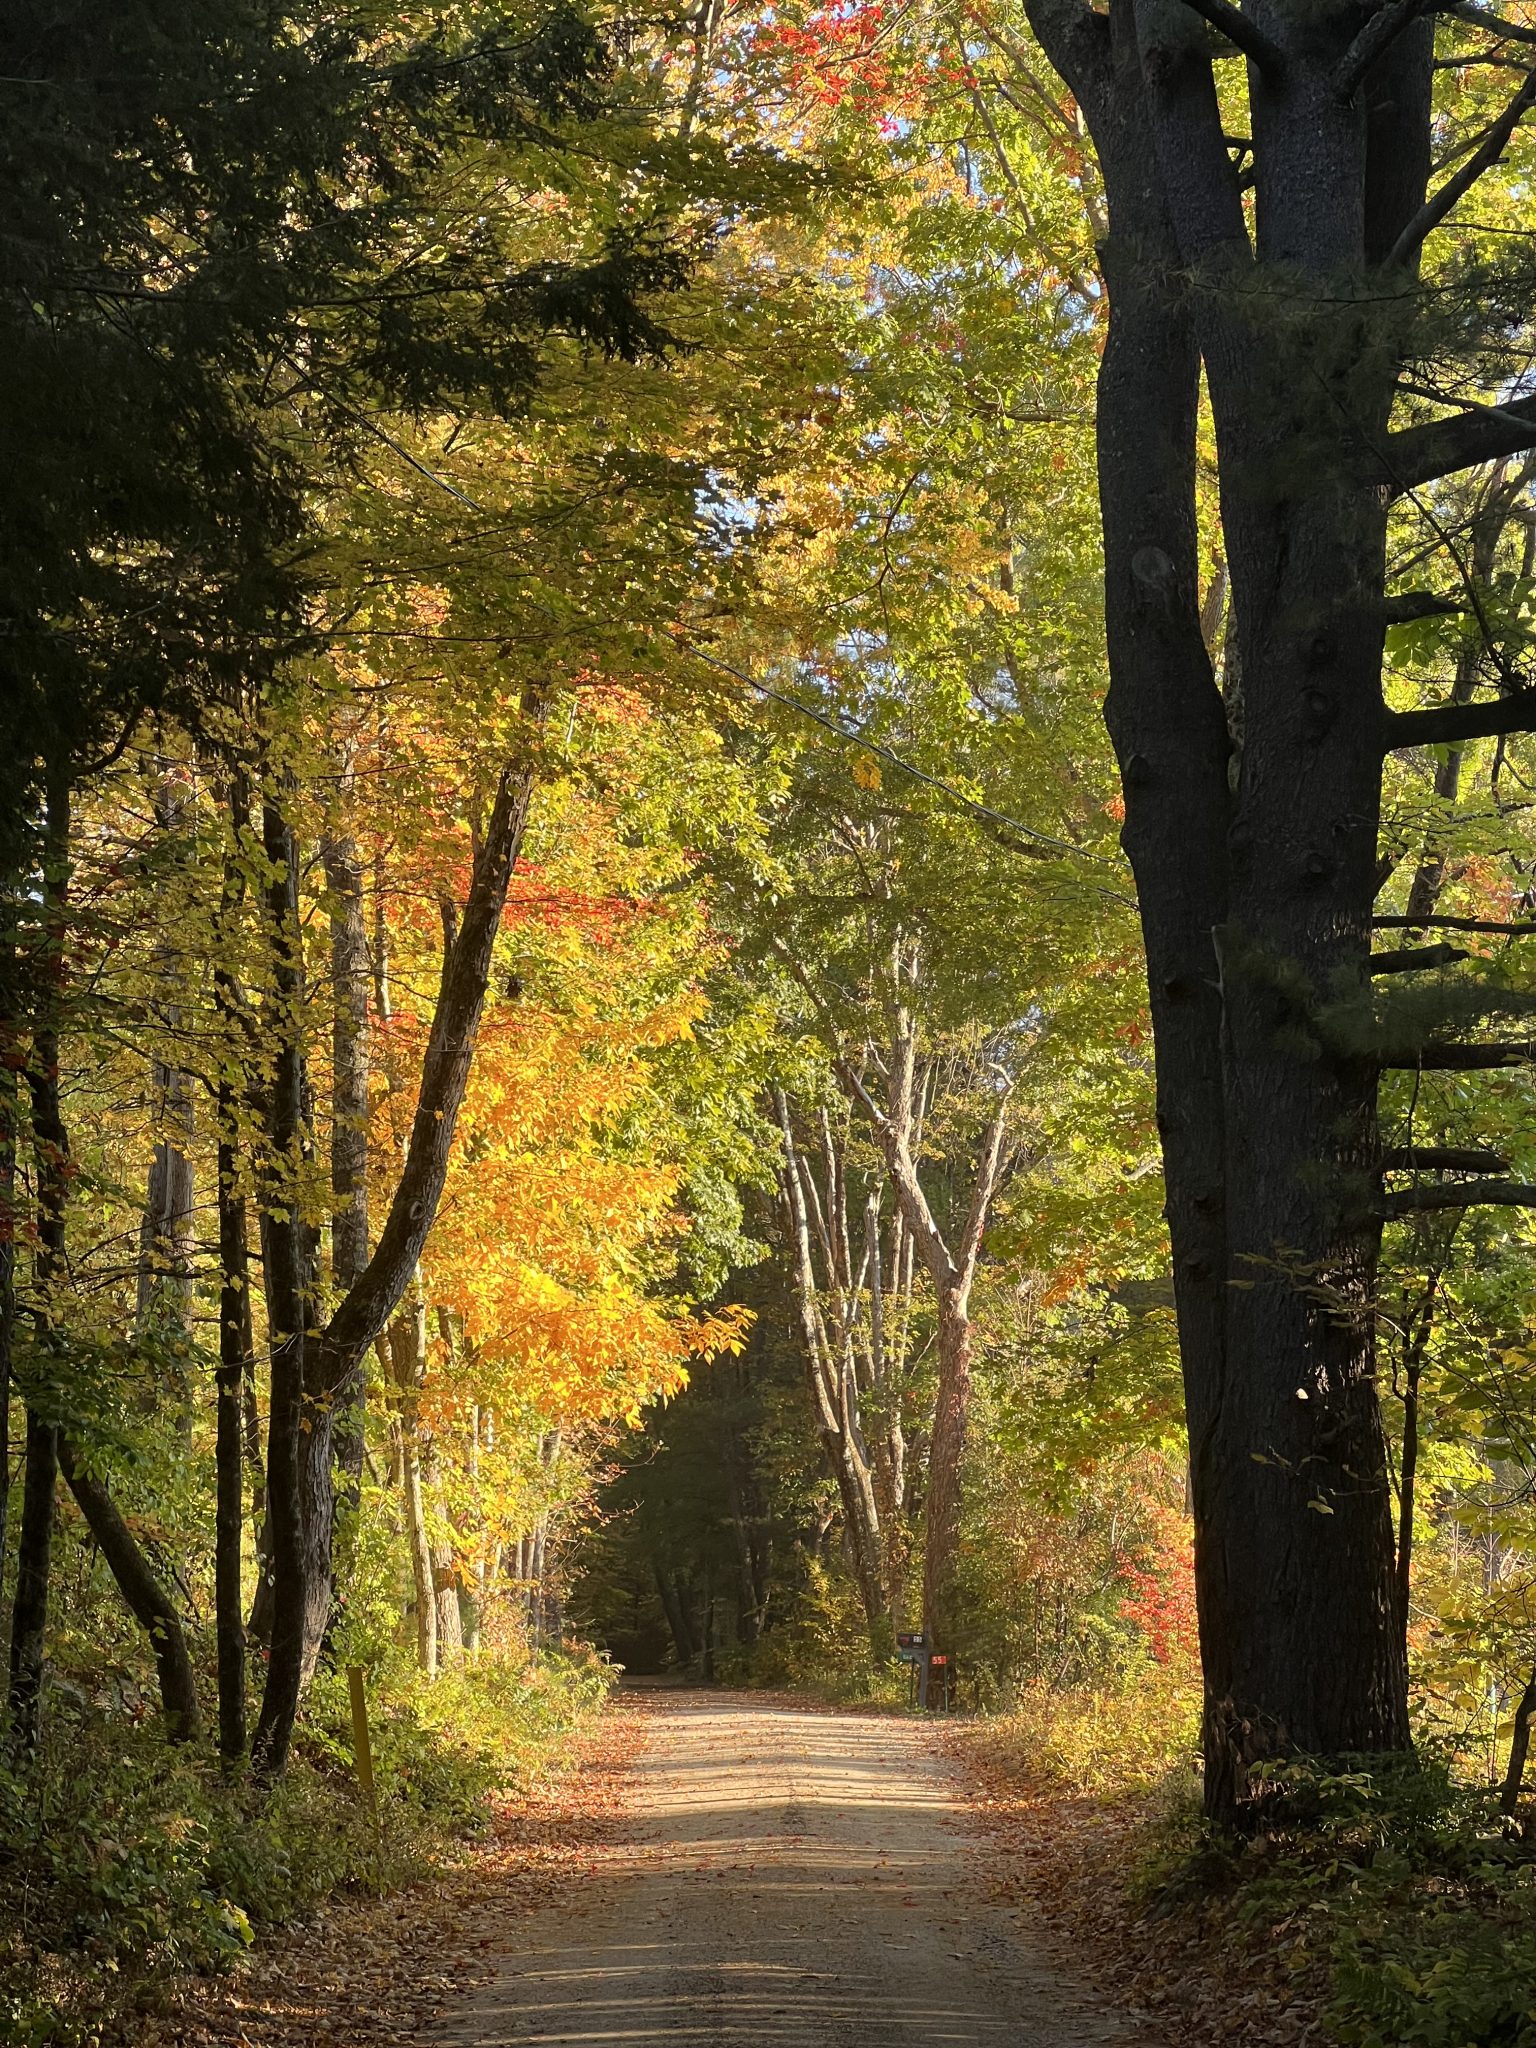 A dirt road in the fall with autumn leaves (foliage).